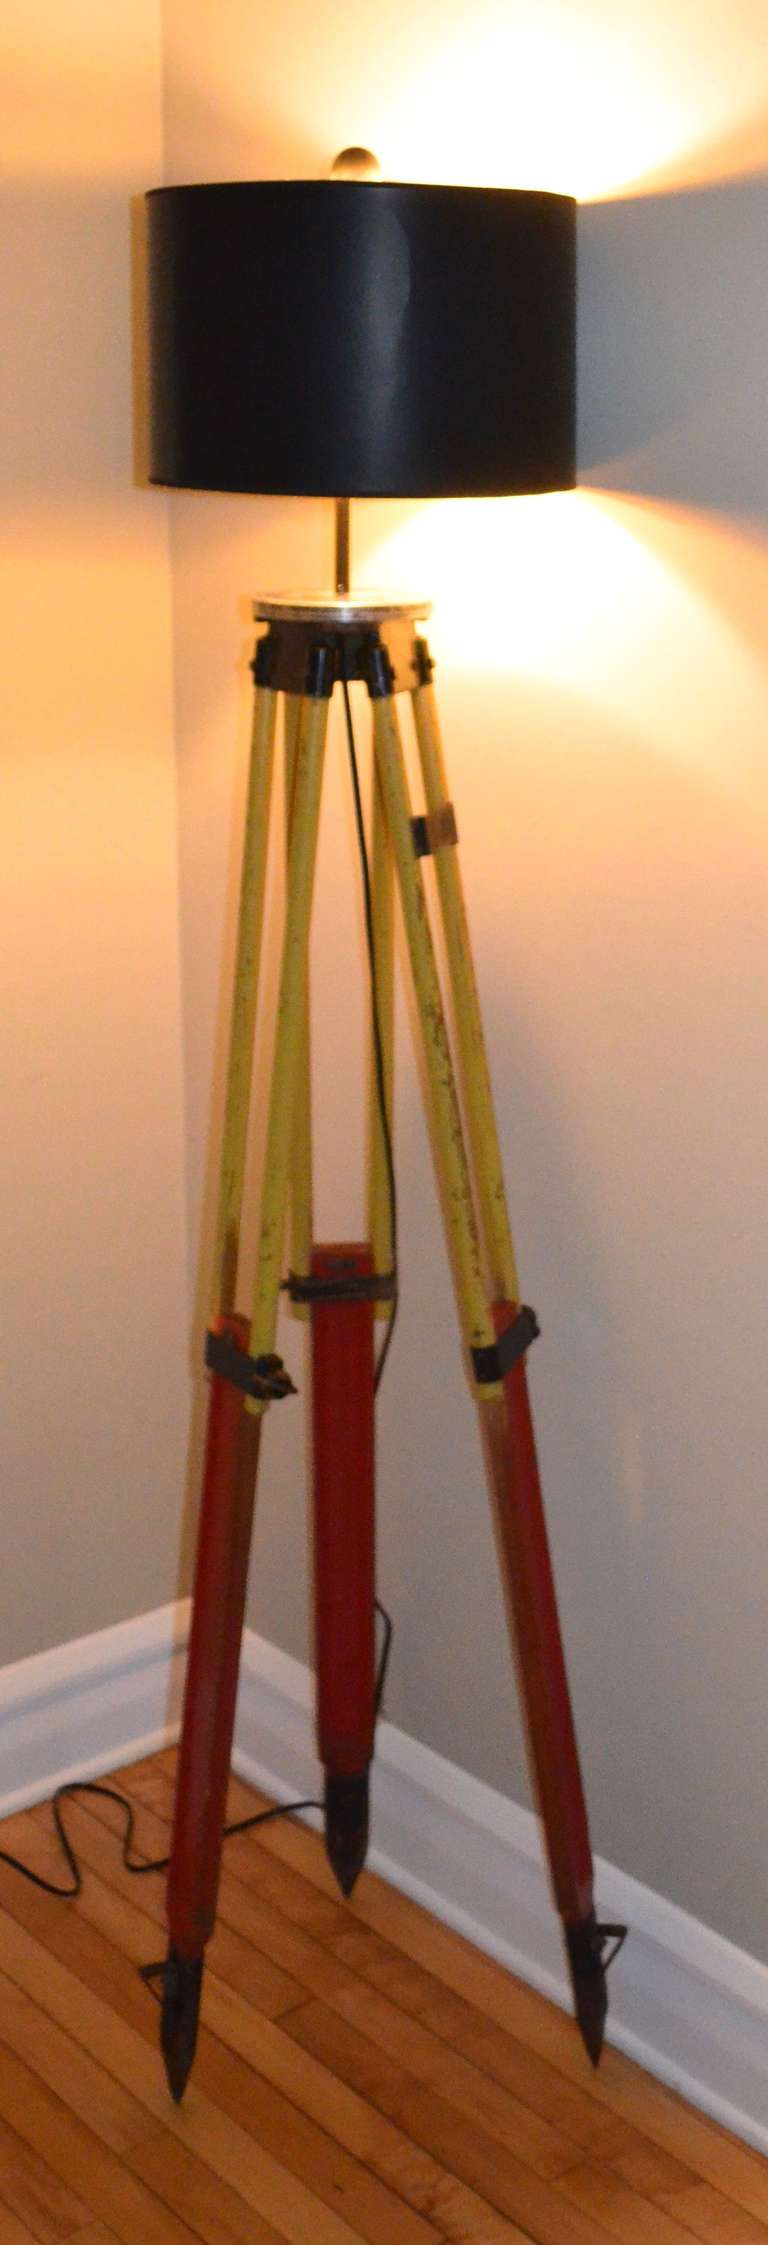 Surveyor's tripod as floor lamp. Professionally wired with UL-approved components including 3-way socket (max. 150 watts), 10-foot cord, harp and wooden ball finial painted black. Height adjusts from 48